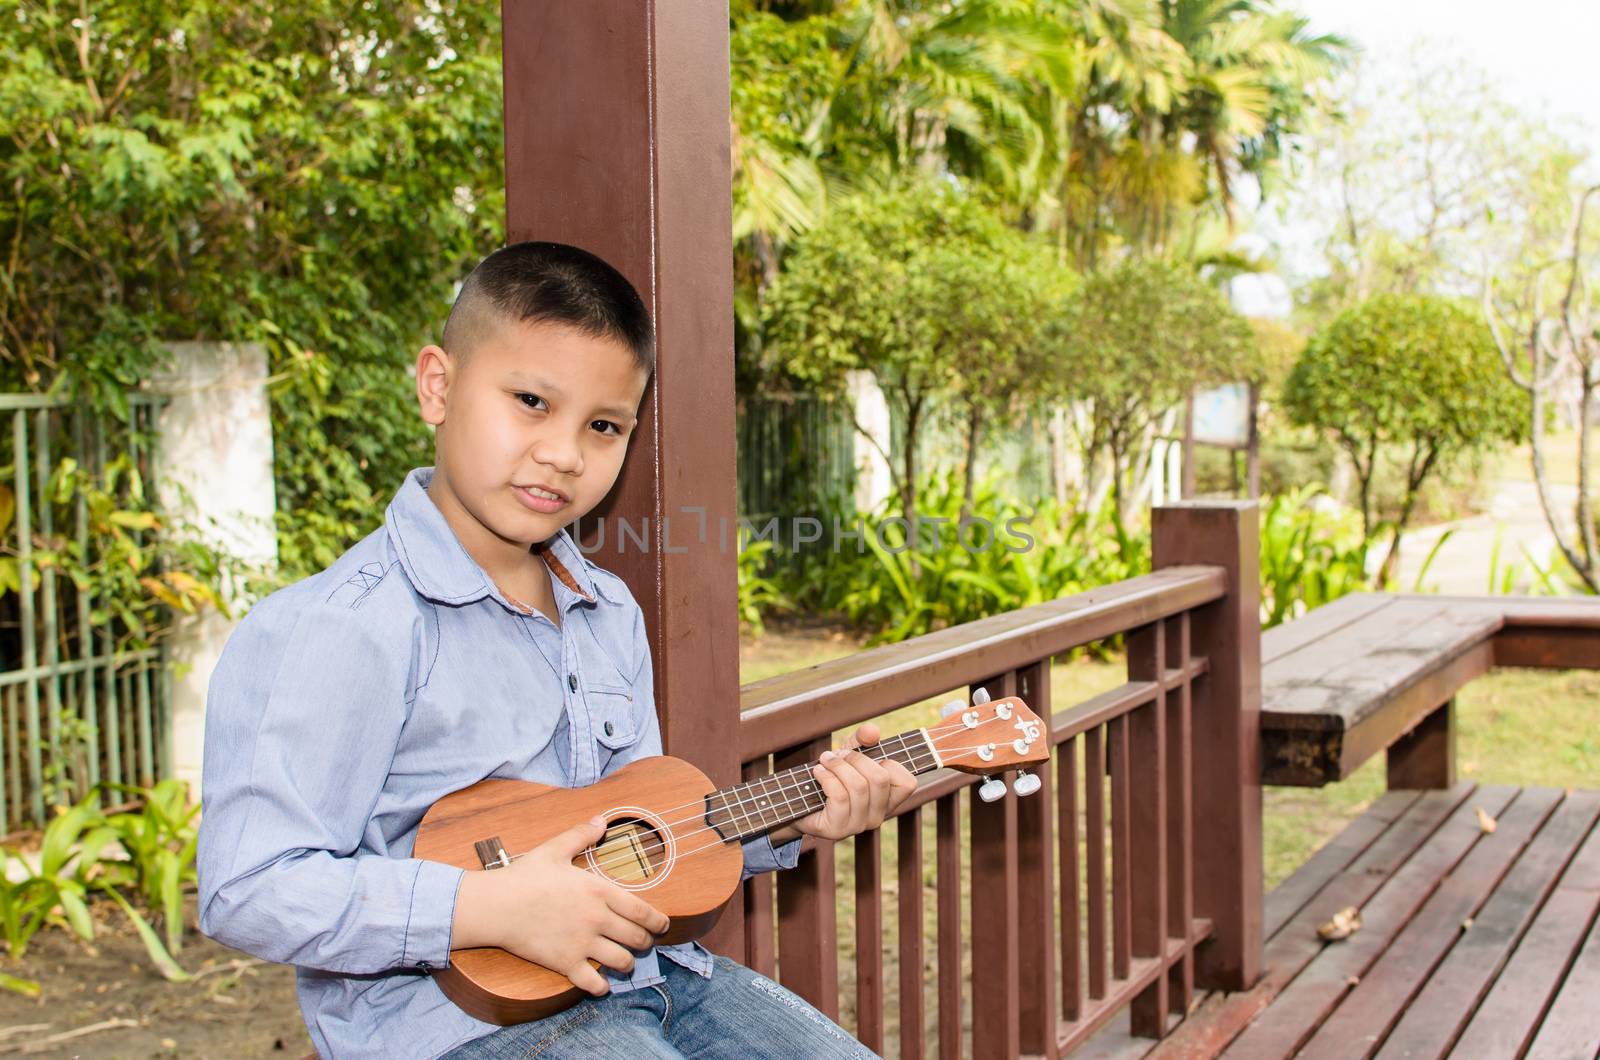 The boy playing the ukulele in the garden.